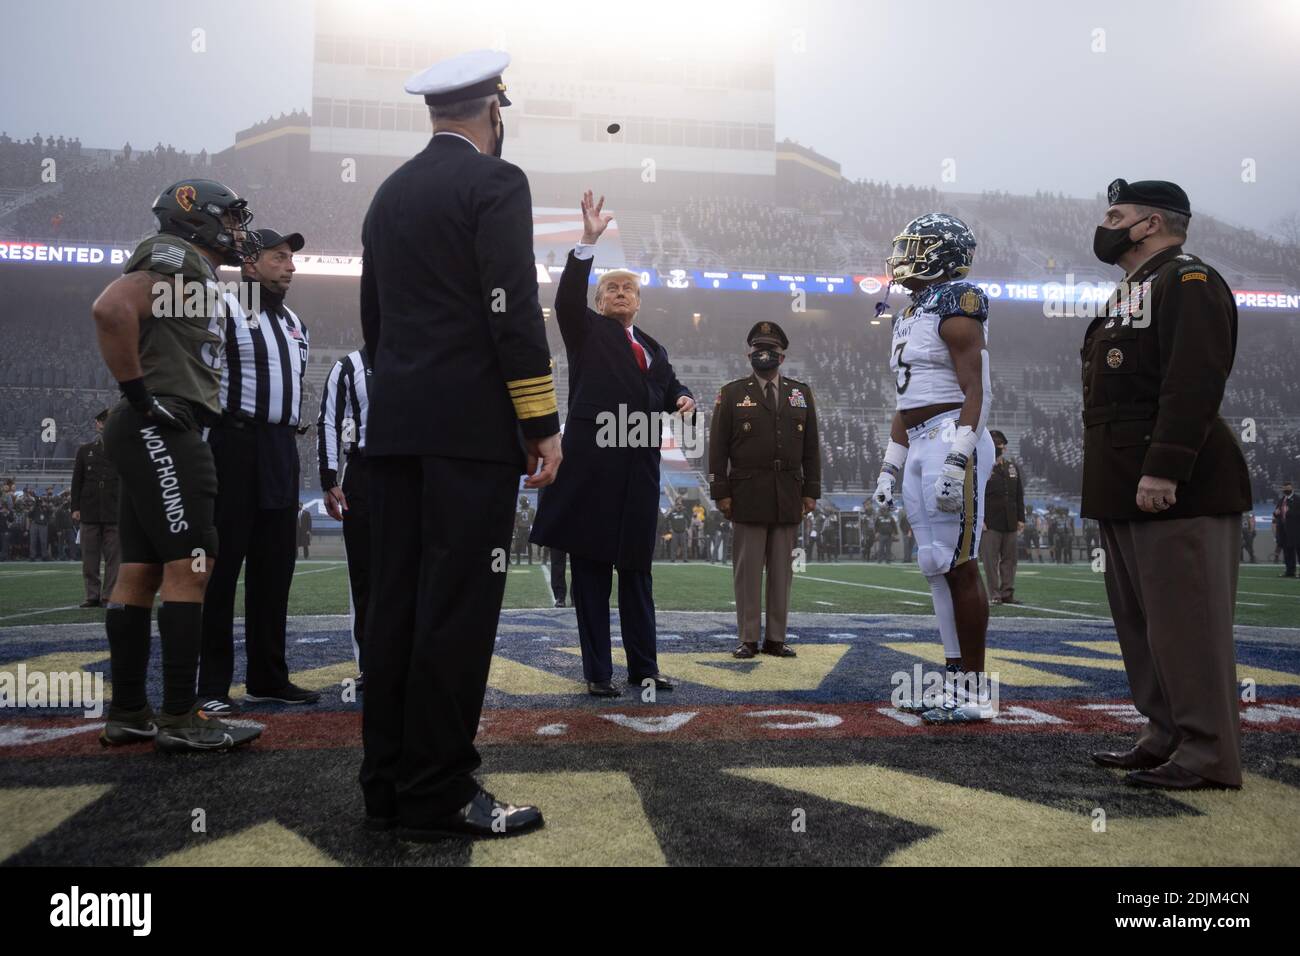 U.S. President Donald Trump tosses the coin toss at the start the 121st Army-Navy football game at Michie Stadium December 12, 2019 in West Point, New York. The Army Black Knights shutout the Navy Midshipmen 15-0. Stock Photo